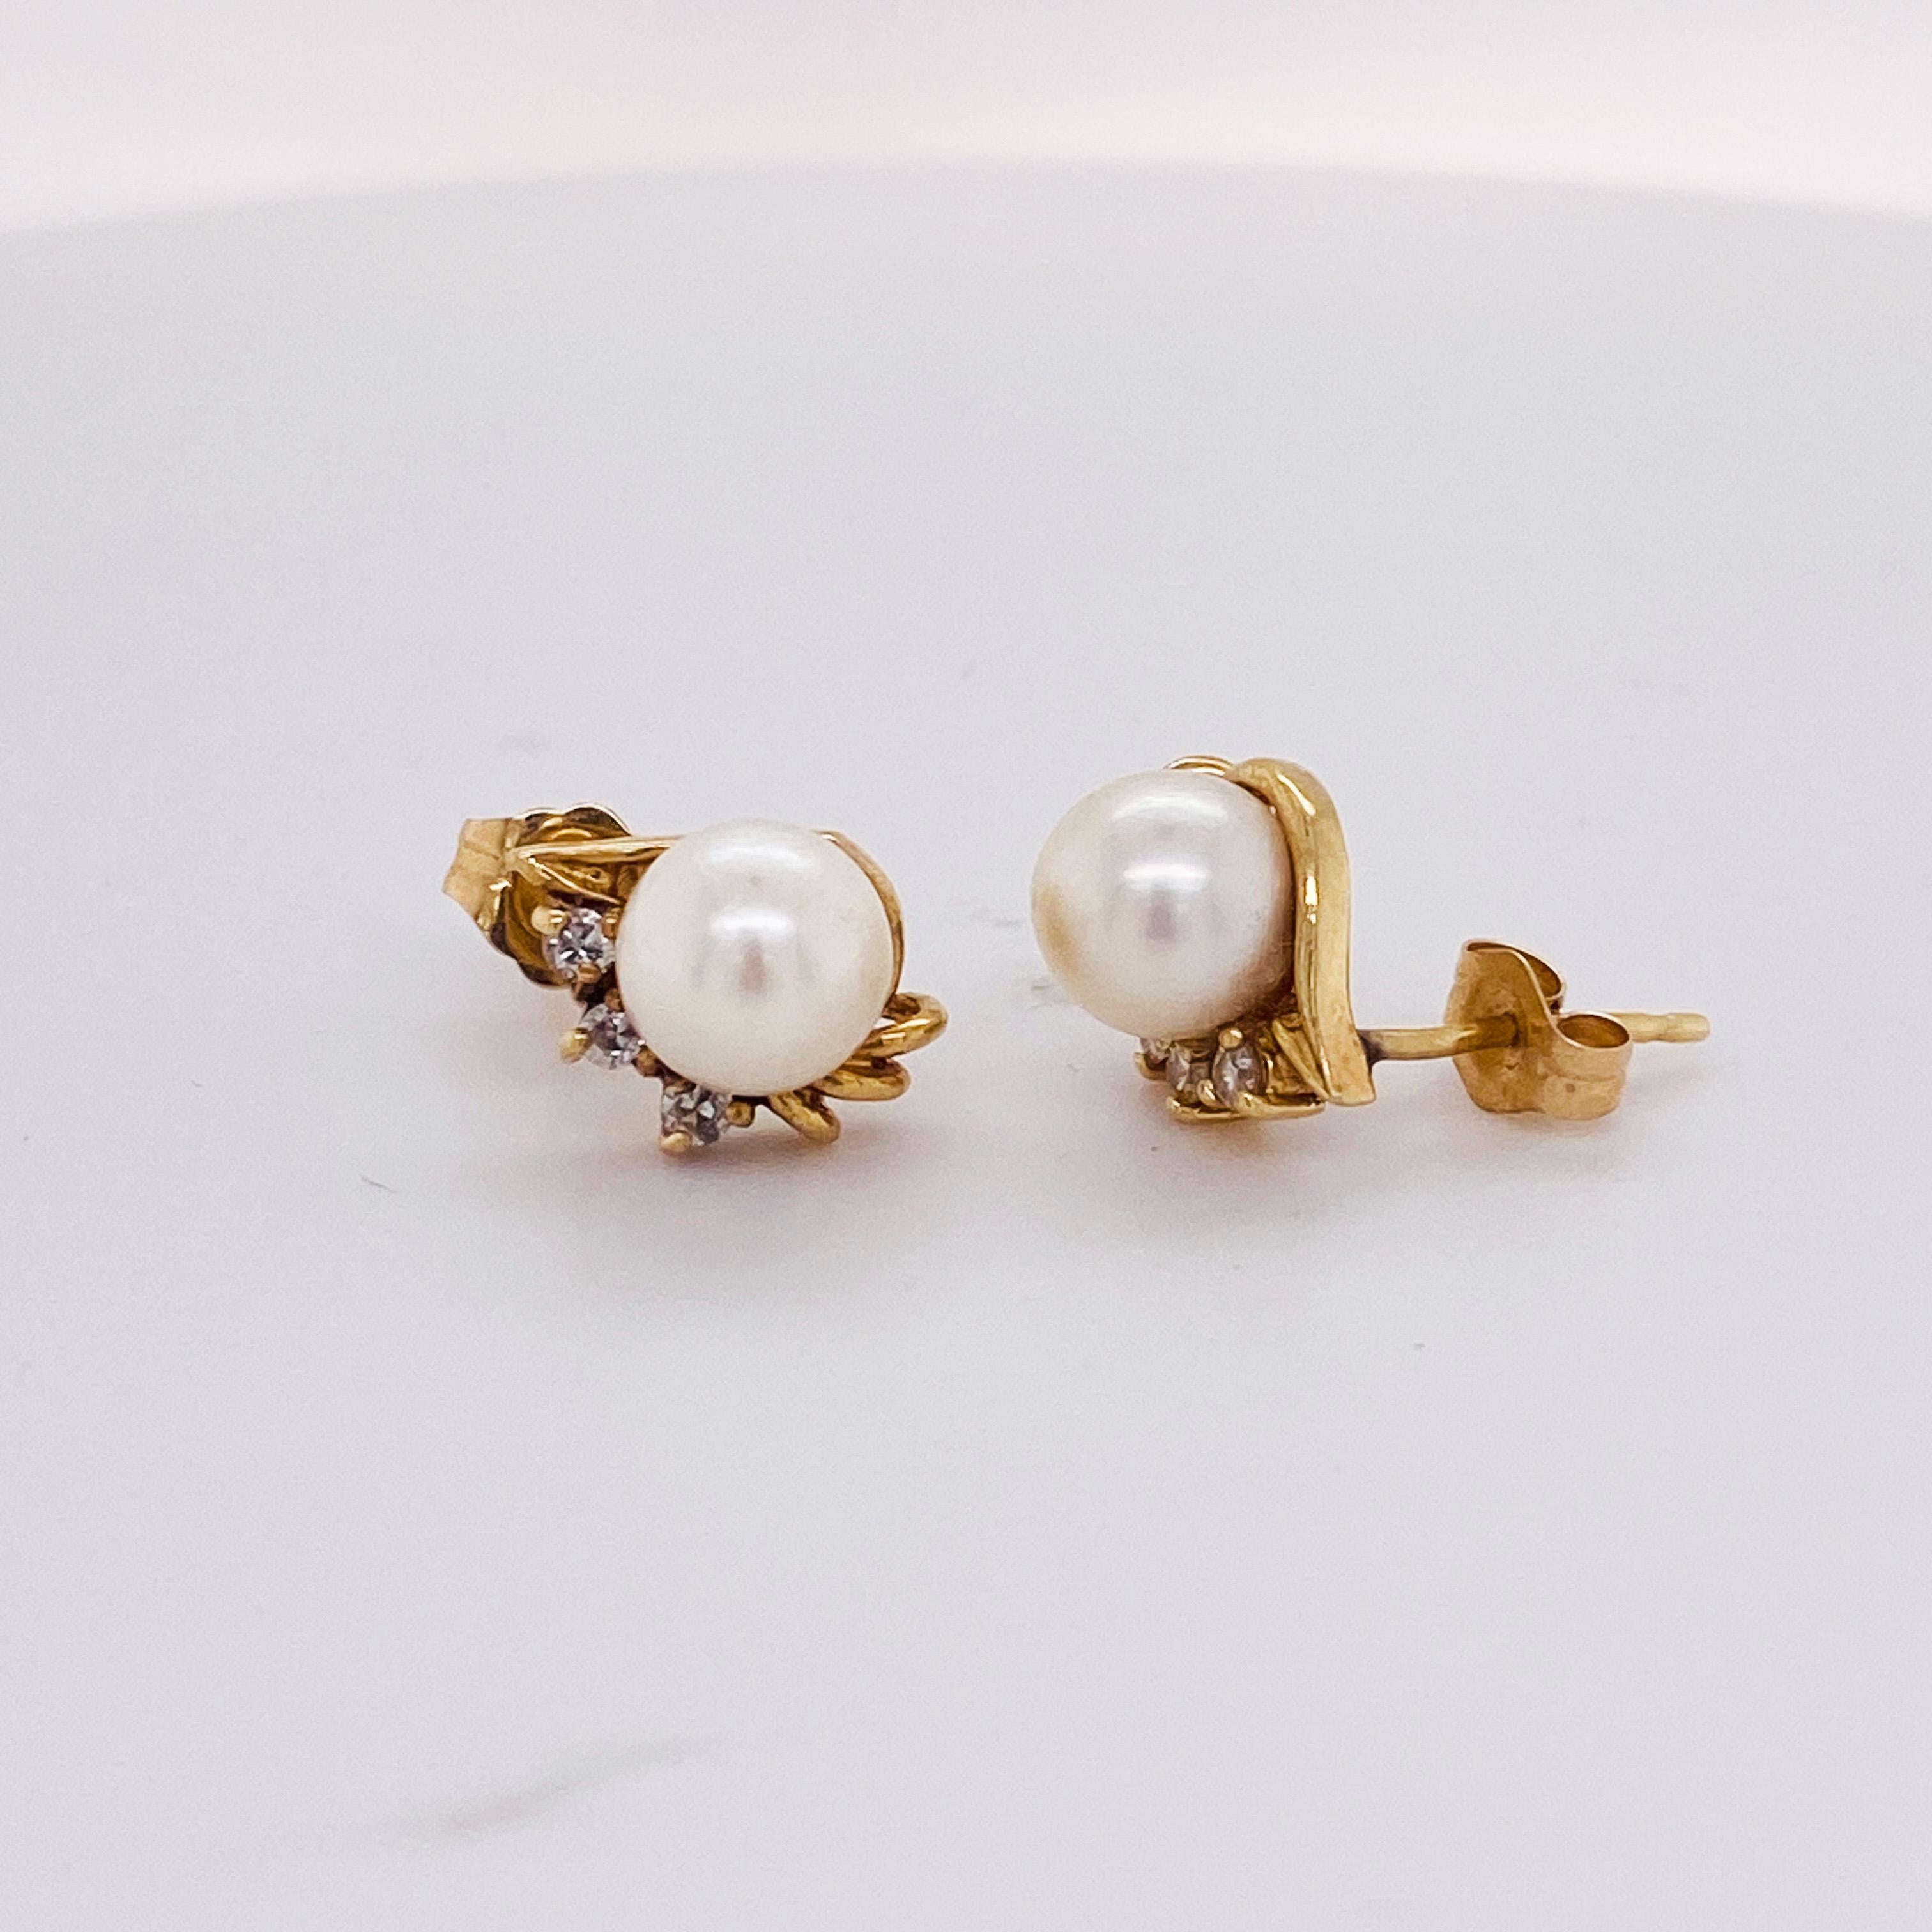 These estate pearl post earrings have lots of personalities. The pearl is adorned with three diamonds around each and has a secure 14-karat yellow gold base with three prongs on each diamond. The diamonds are nice quality at VS clarity and Near